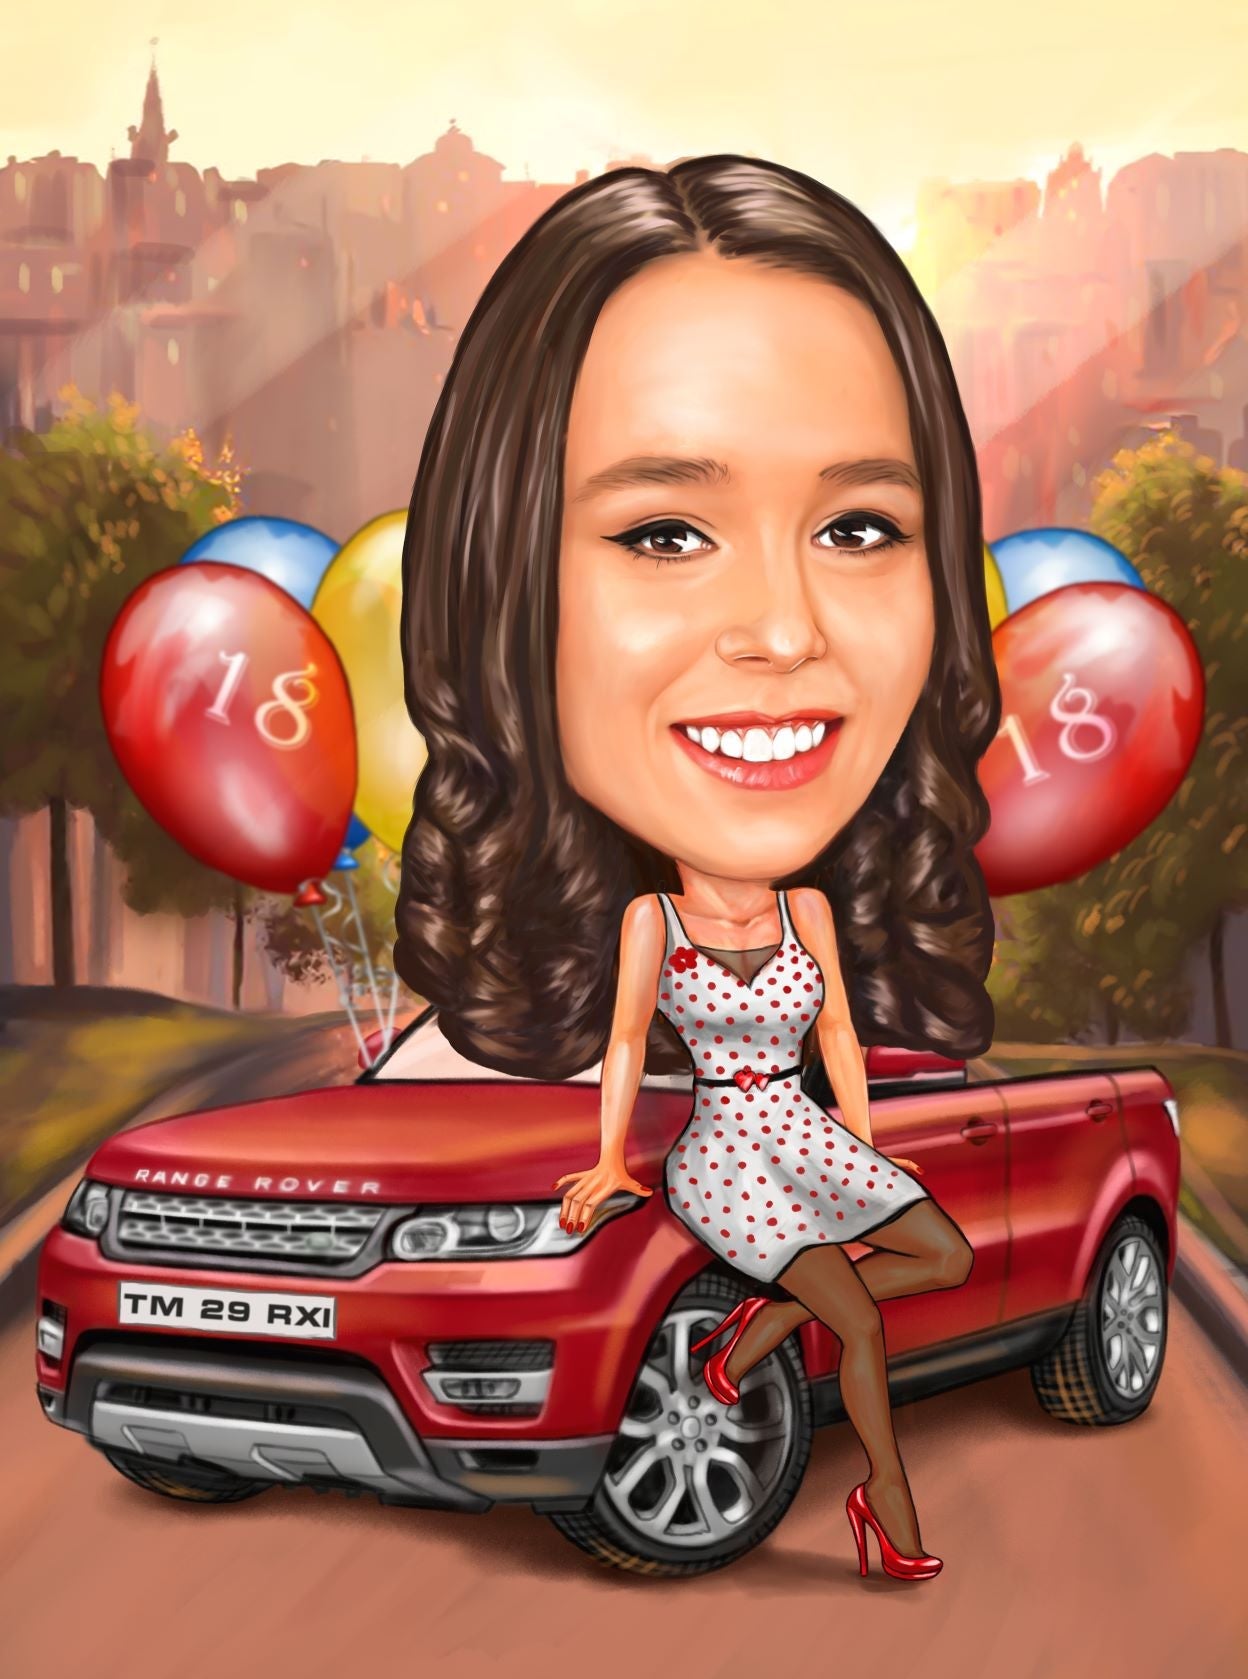 18th anniversary car gift caricature